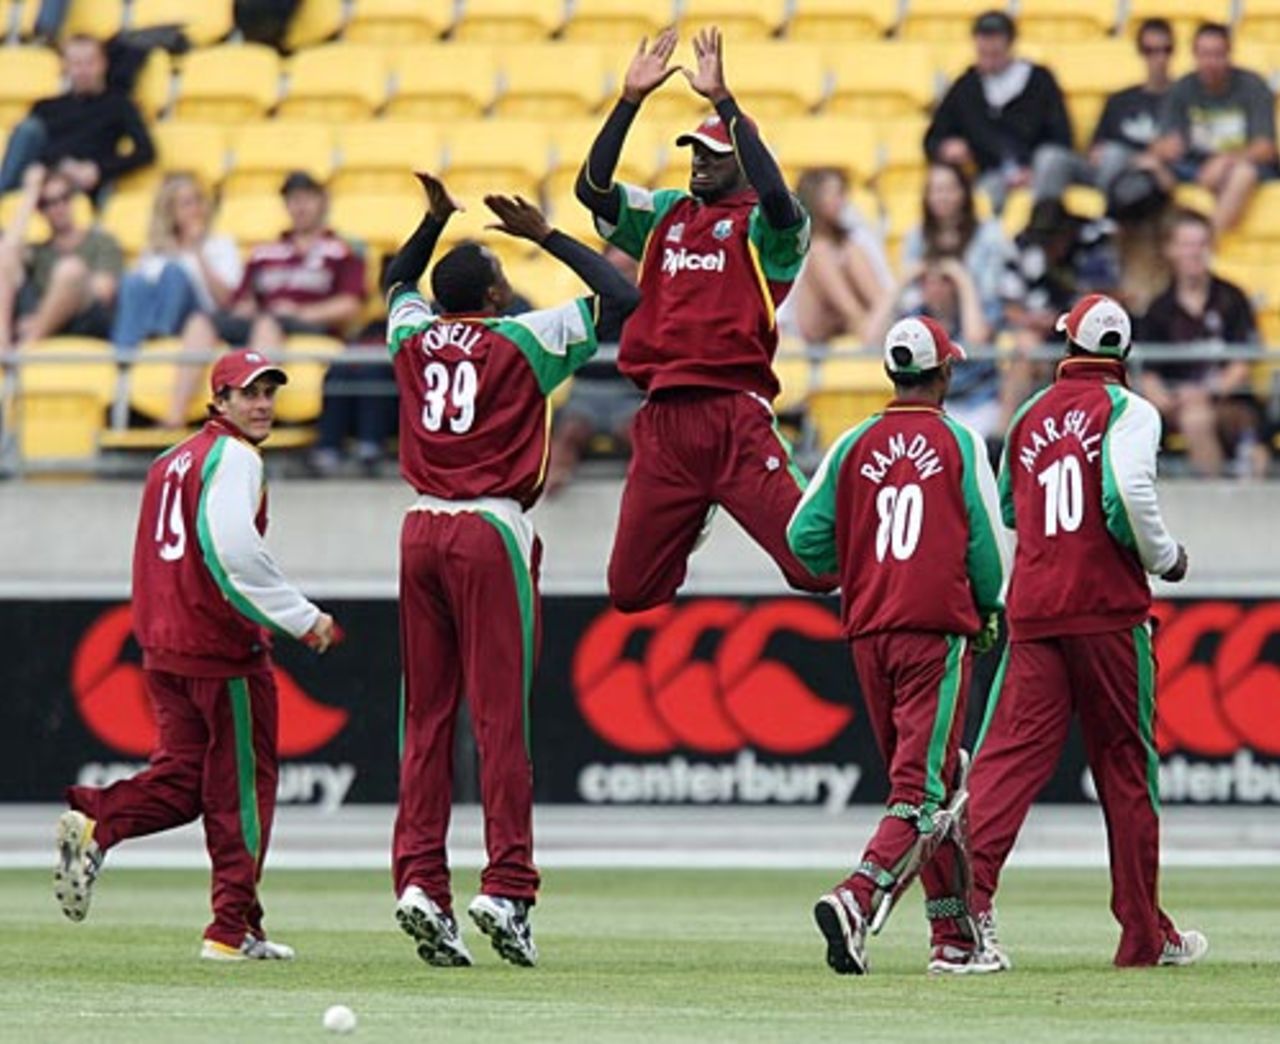 The West Indies players celebrate the fall of Jamie How's wicket, New Zealand v West Indies, 3rd ODI, Wellington, January 7, 2009